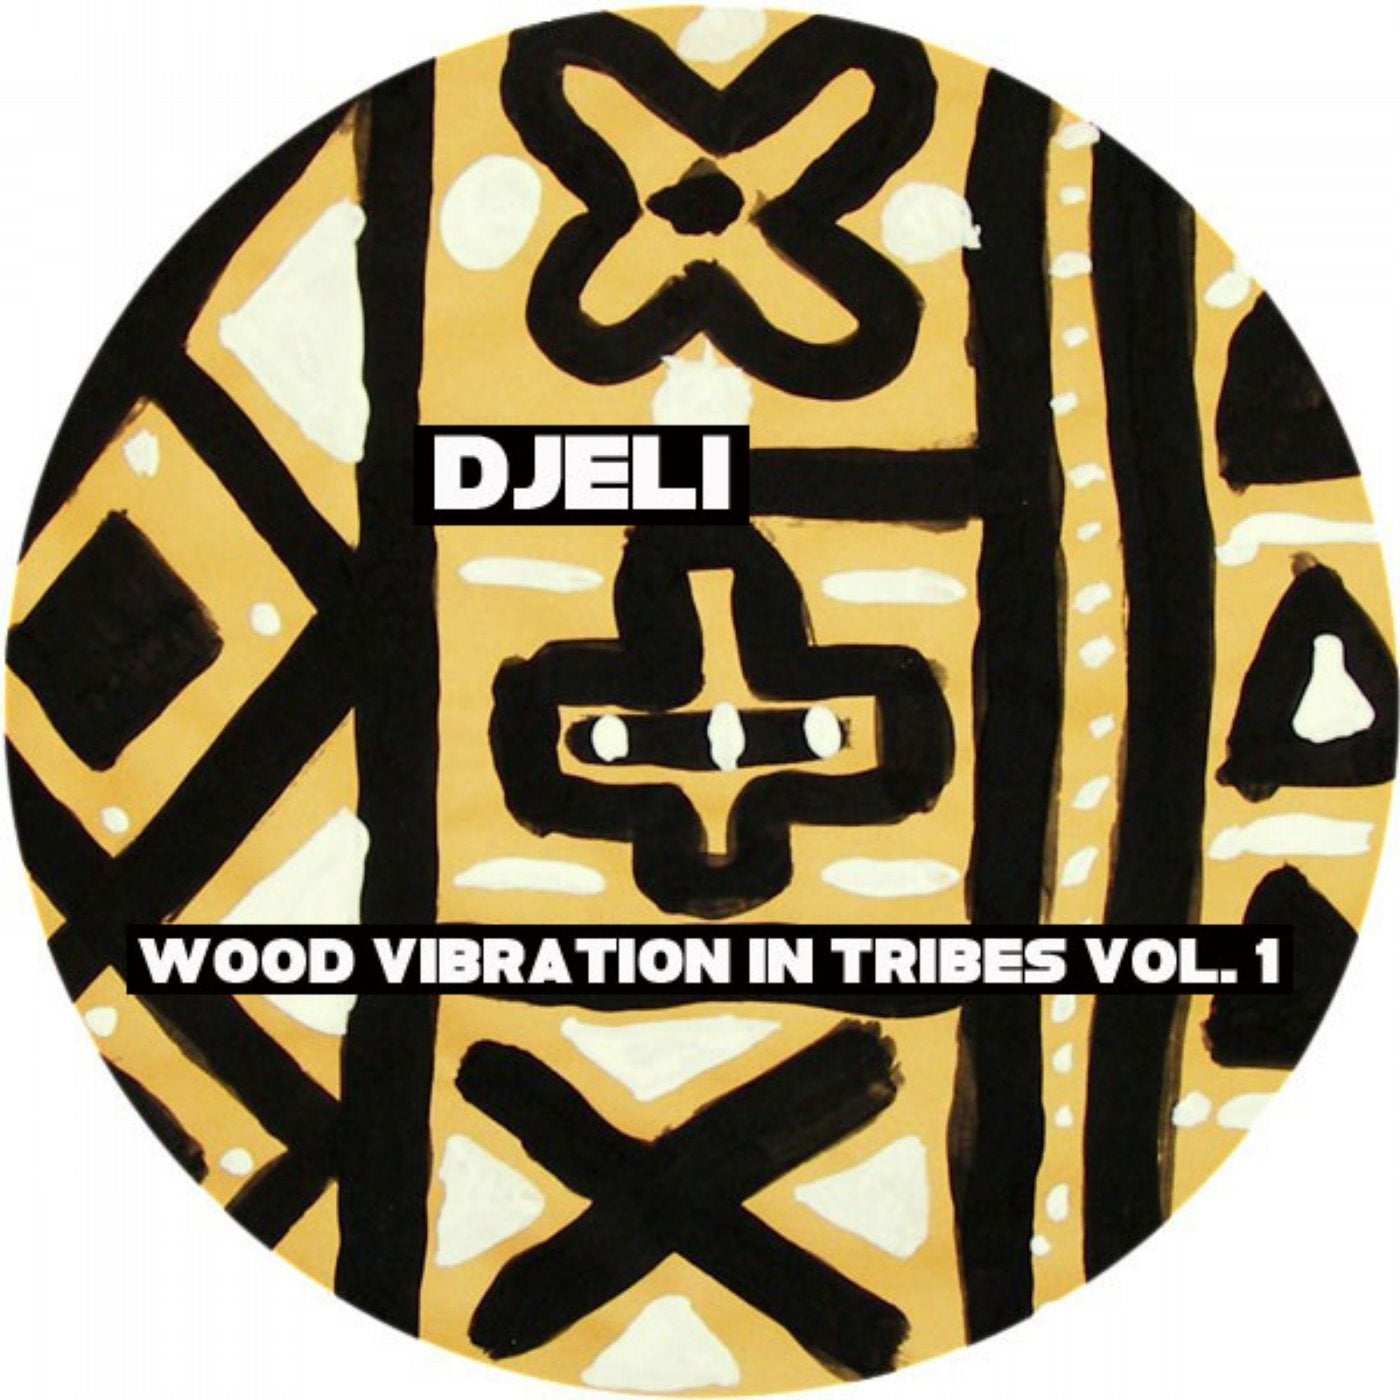 Wood Vibration In Tribes Vol. 1